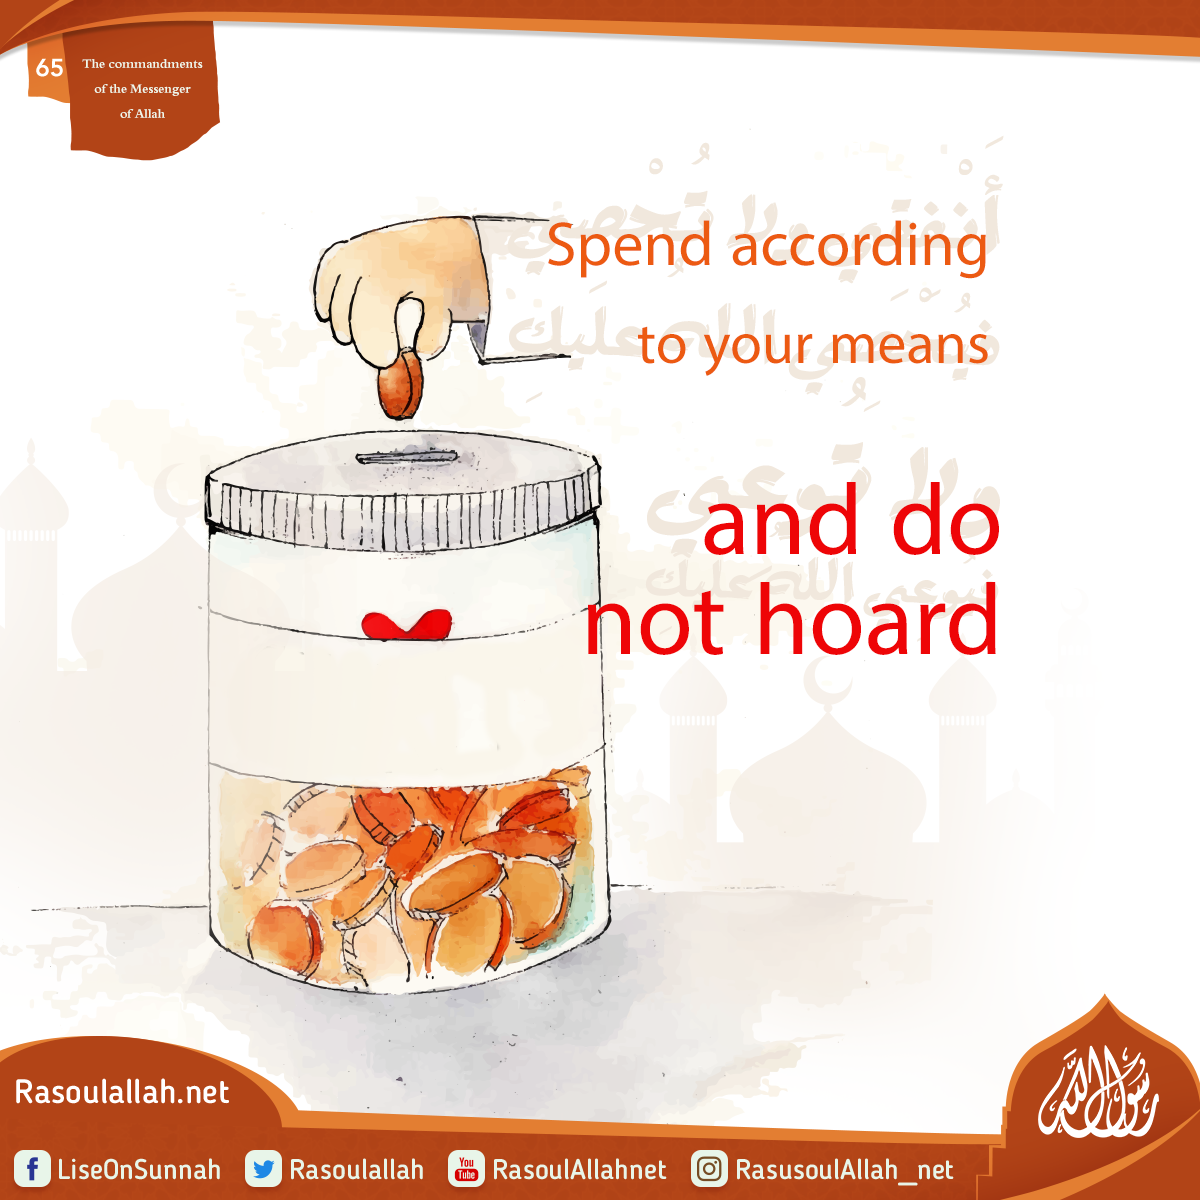 Spend according to your means; and do not hoard